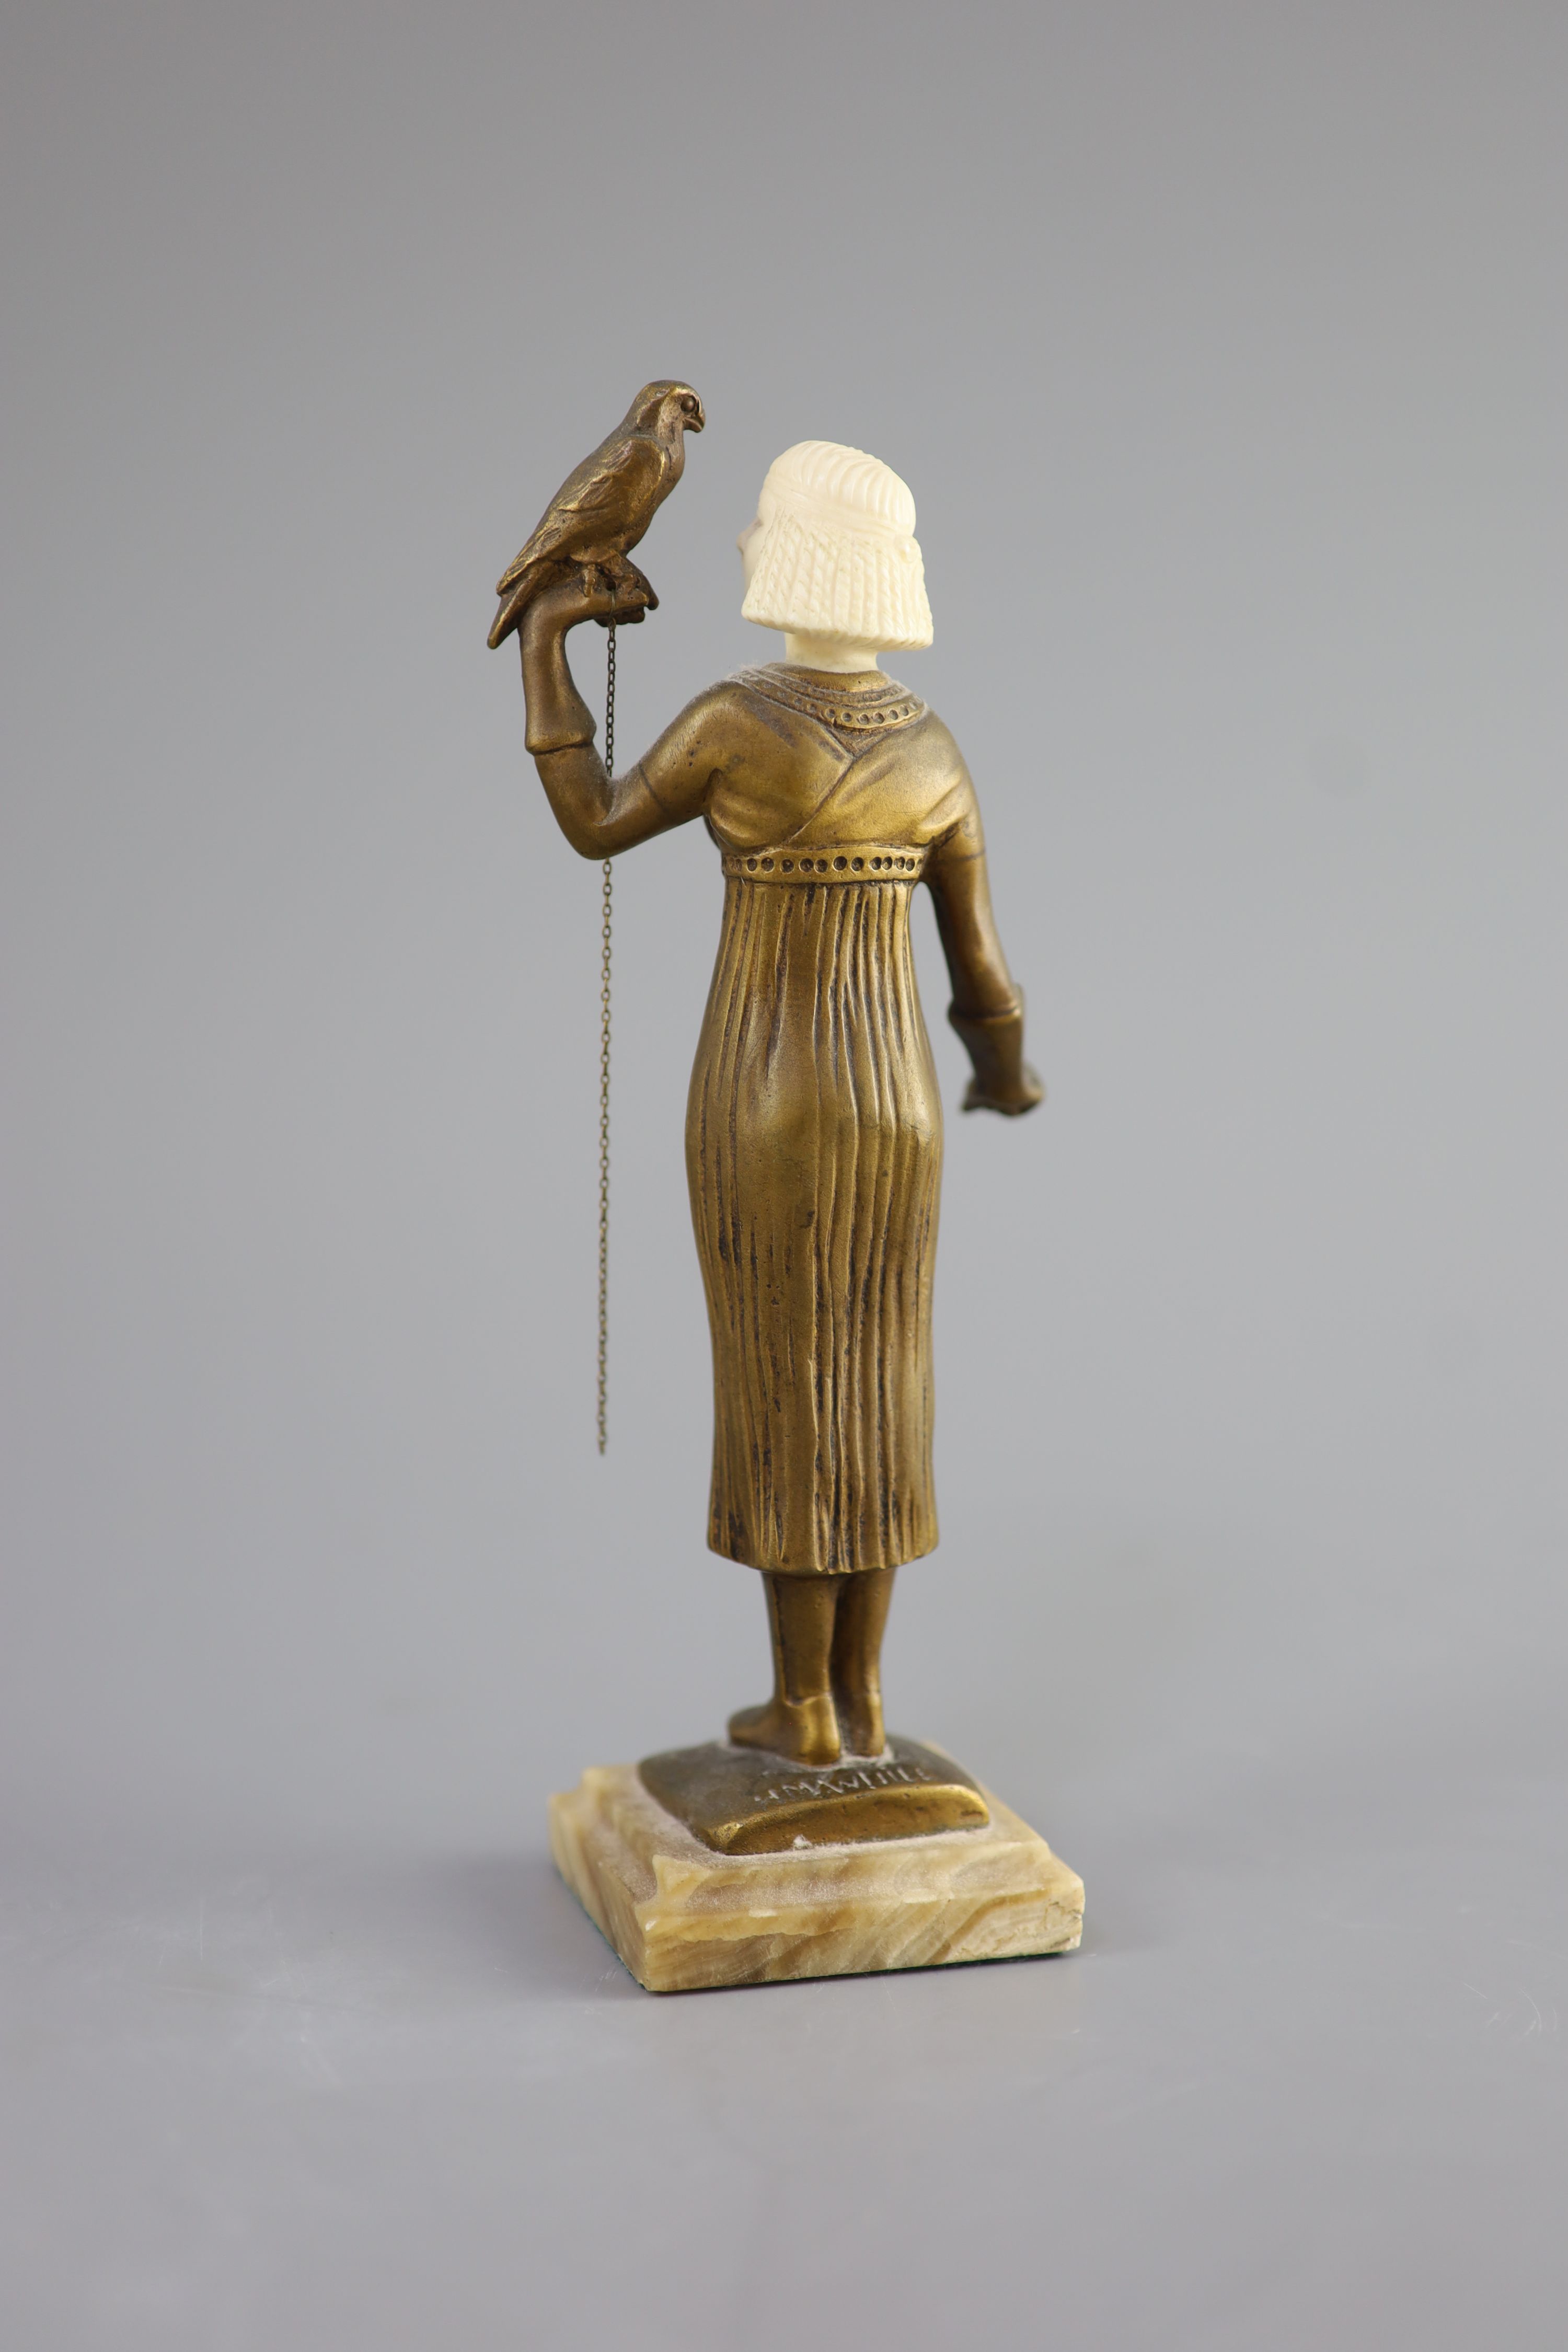 Hélène Maynard White (American, b.1870). A bronze and ivory figure of an Egyptianesque girl, holding a falcon, c1920, 20cm high